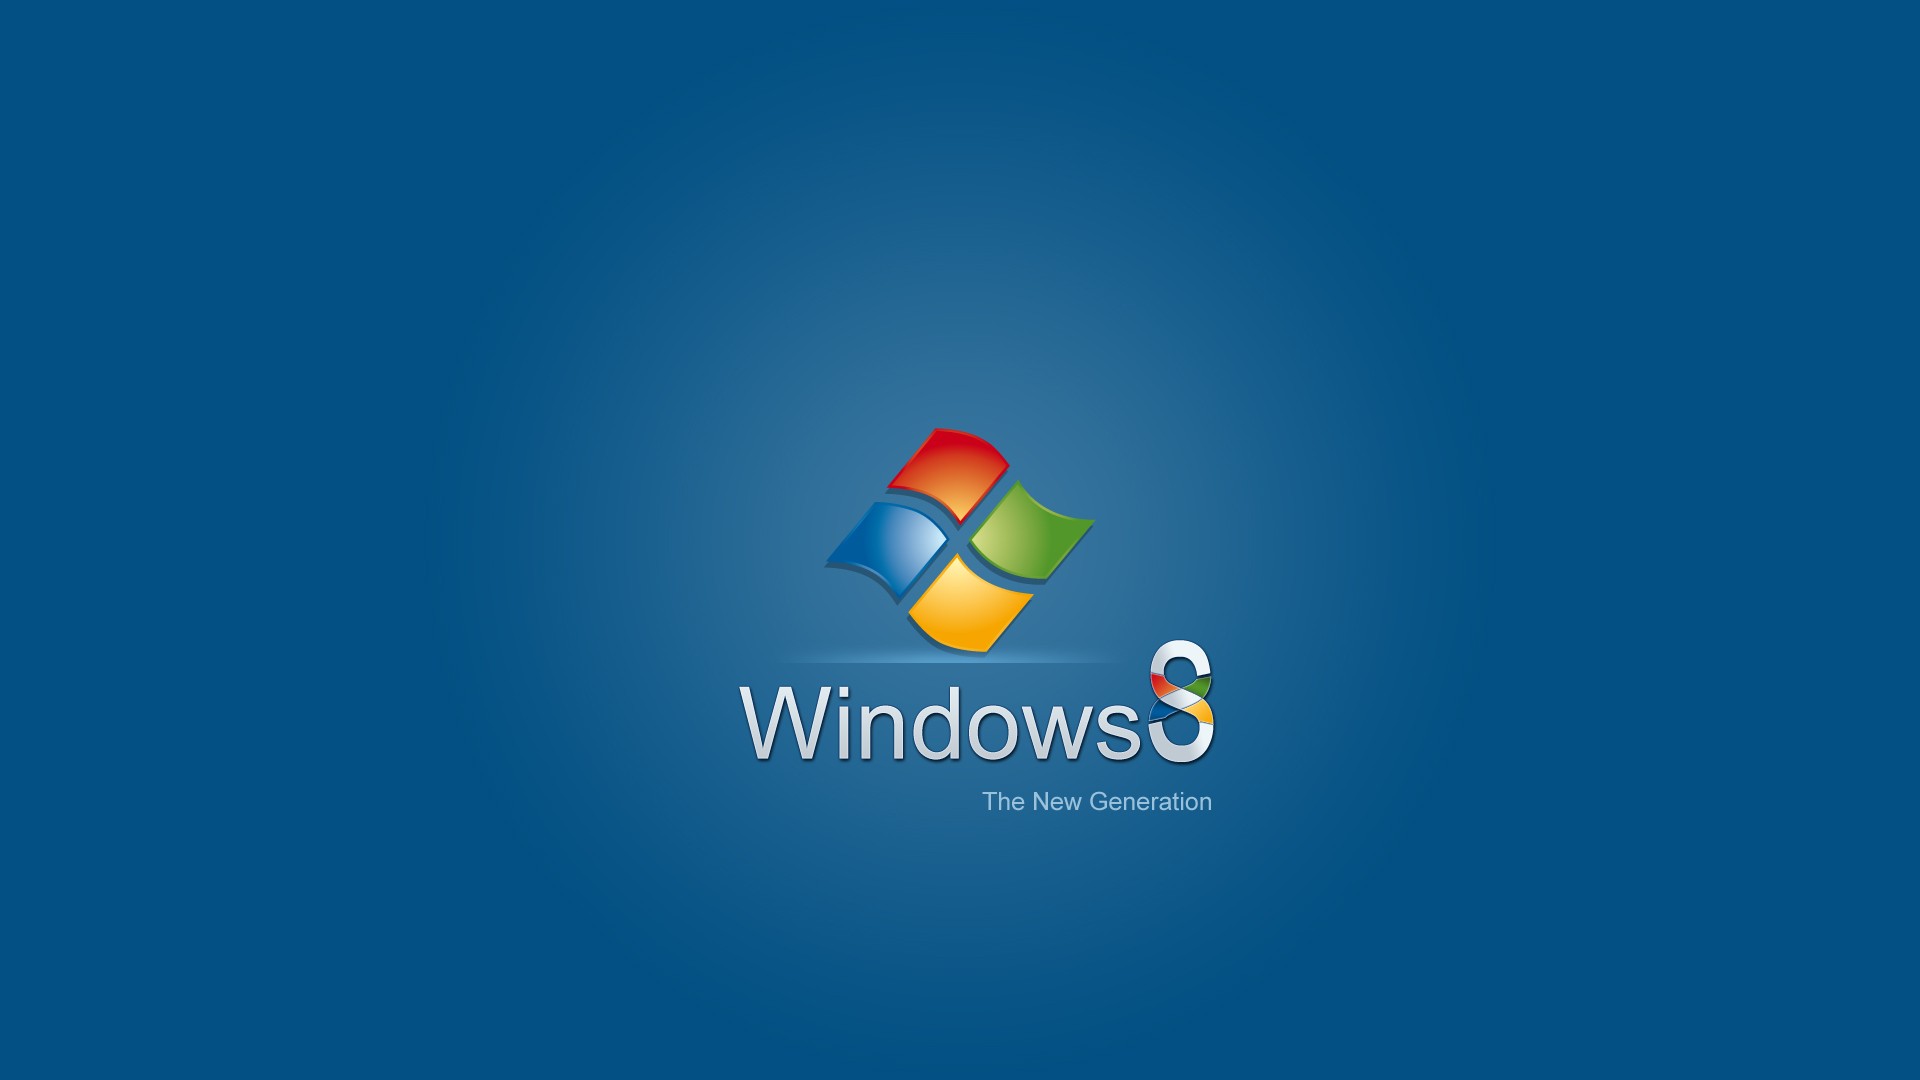 High Quality Windows 8 Microsoft Wallpaper With Resolutions 19201080